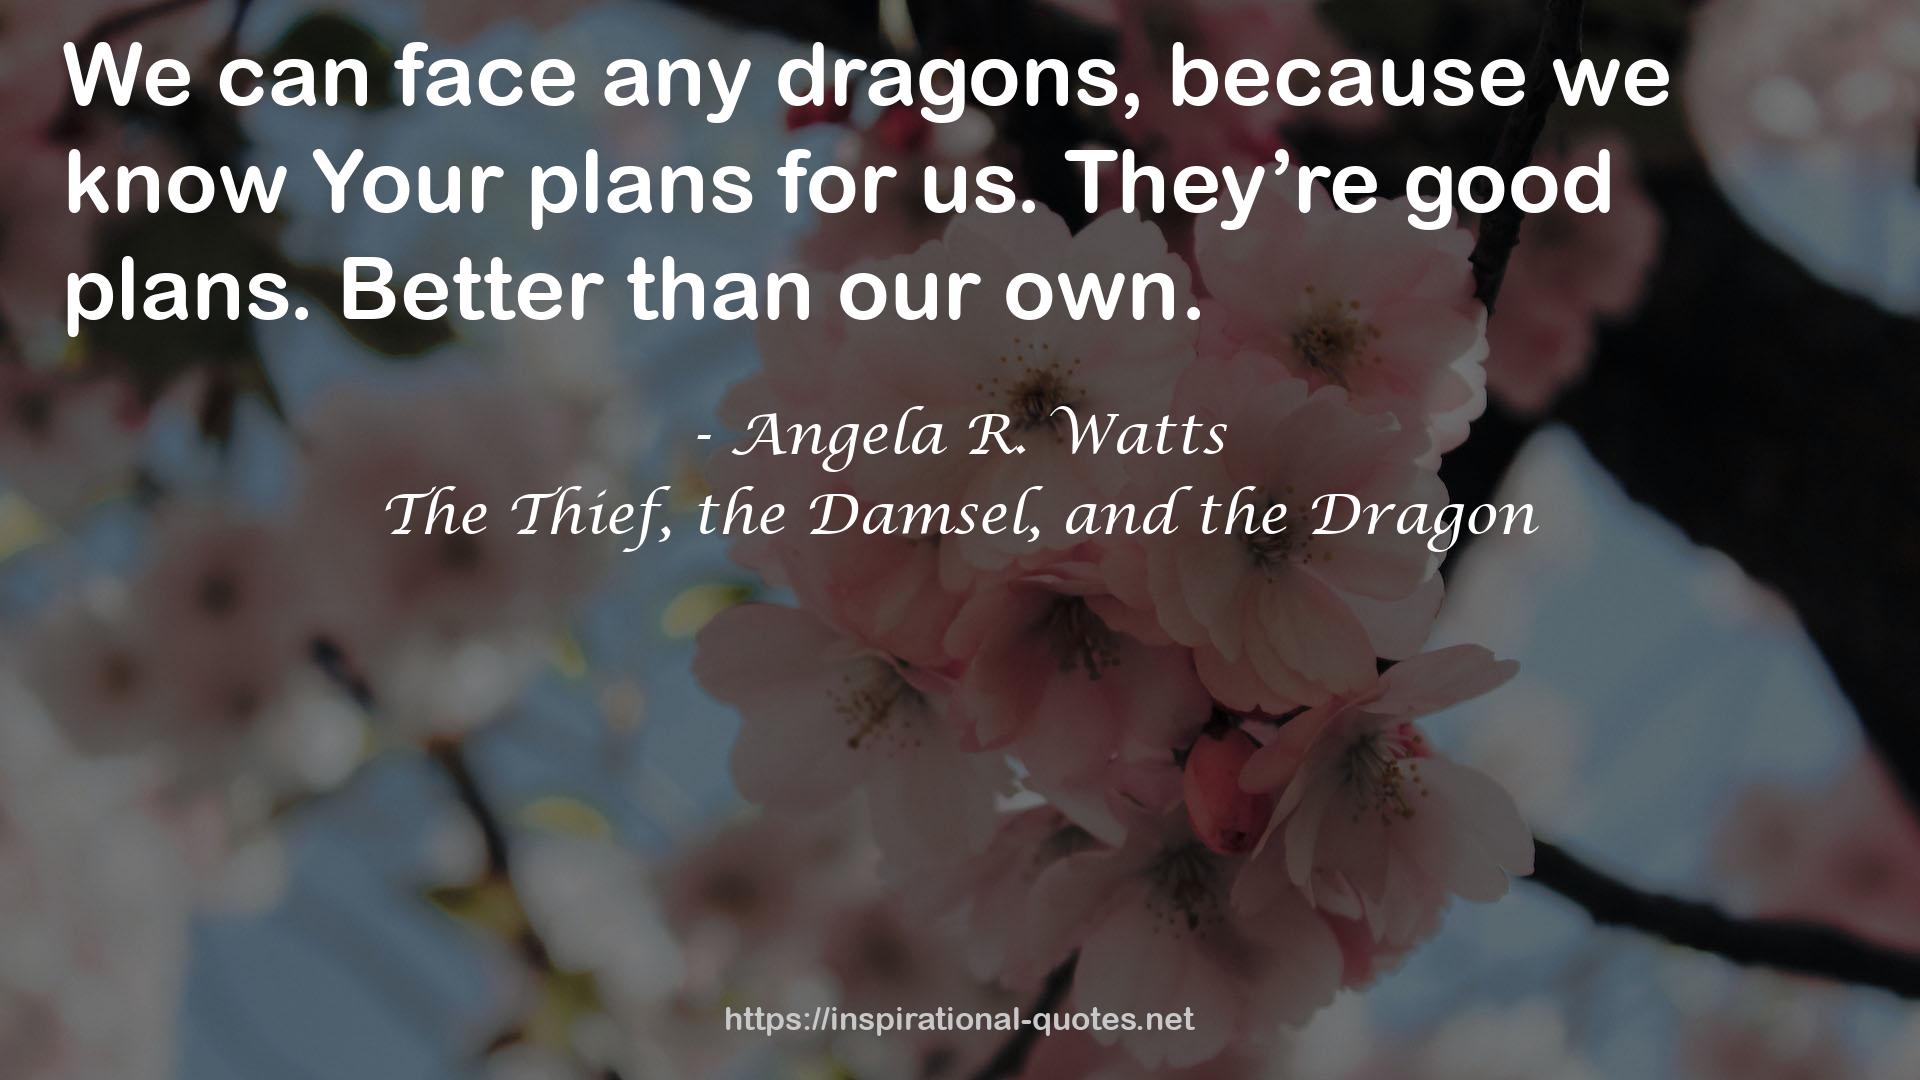 The Thief, the Damsel, and the Dragon QUOTES